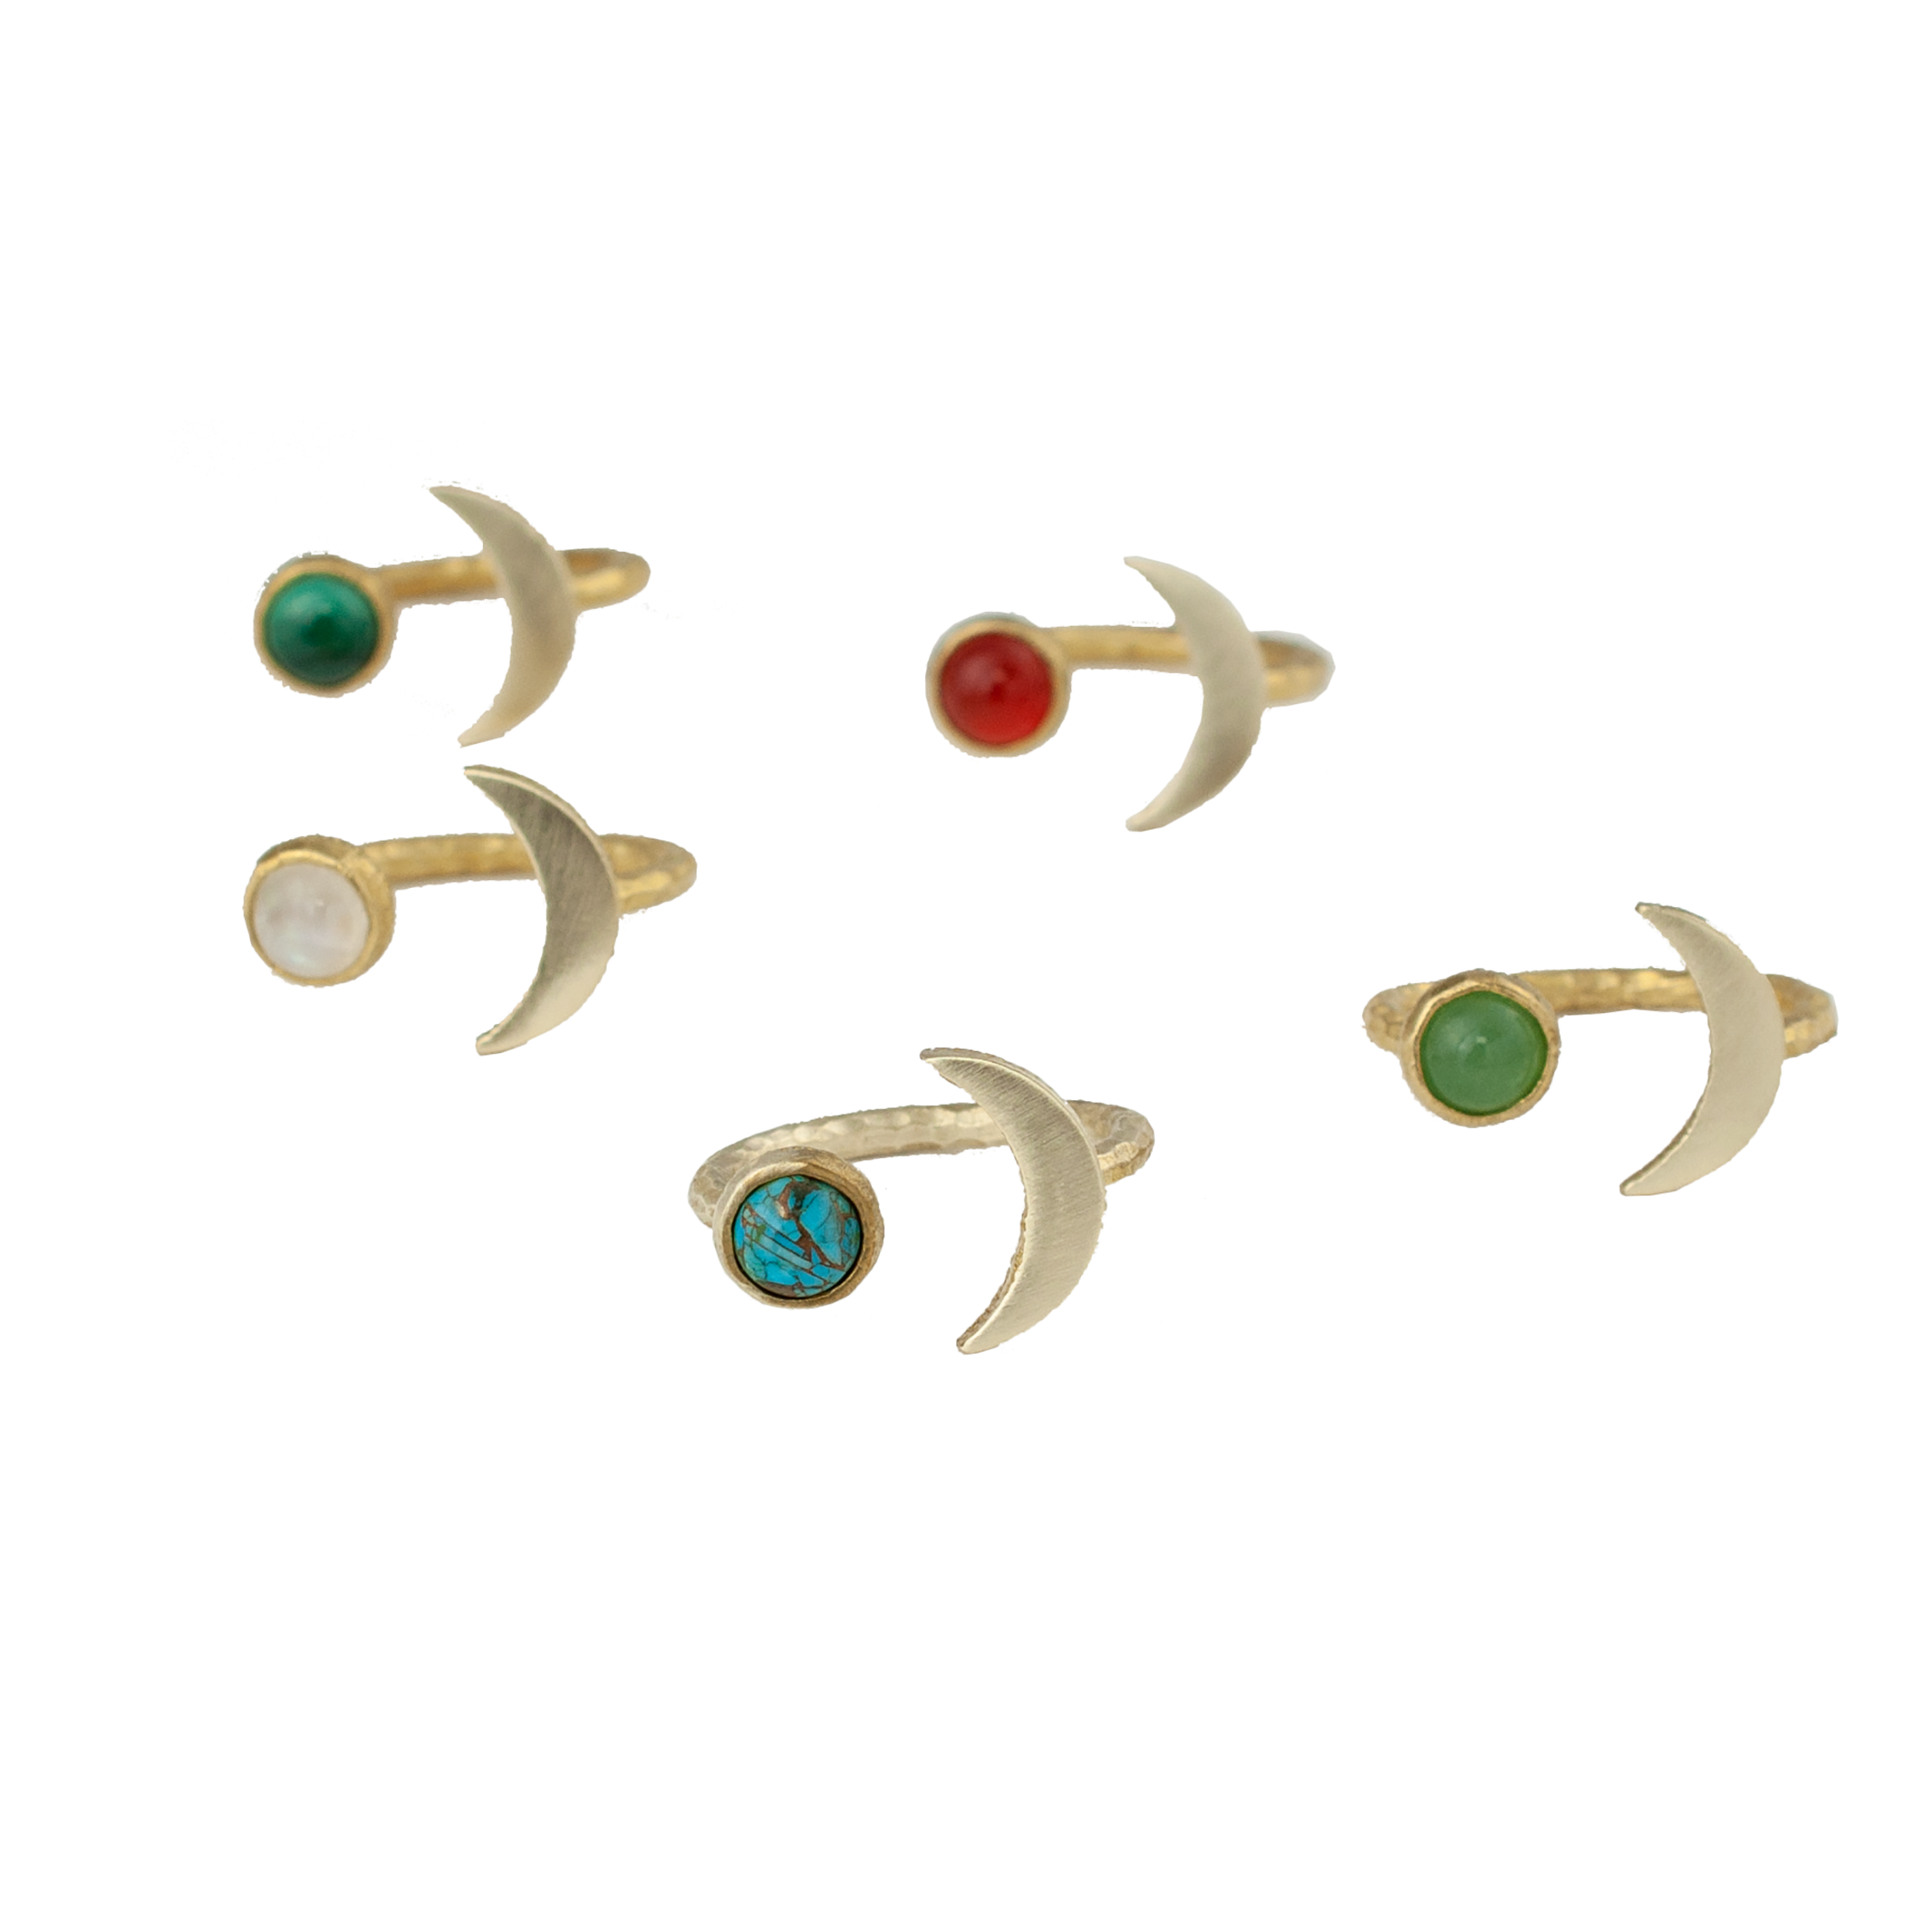 Moon shaped rings with brass and natural gemstones